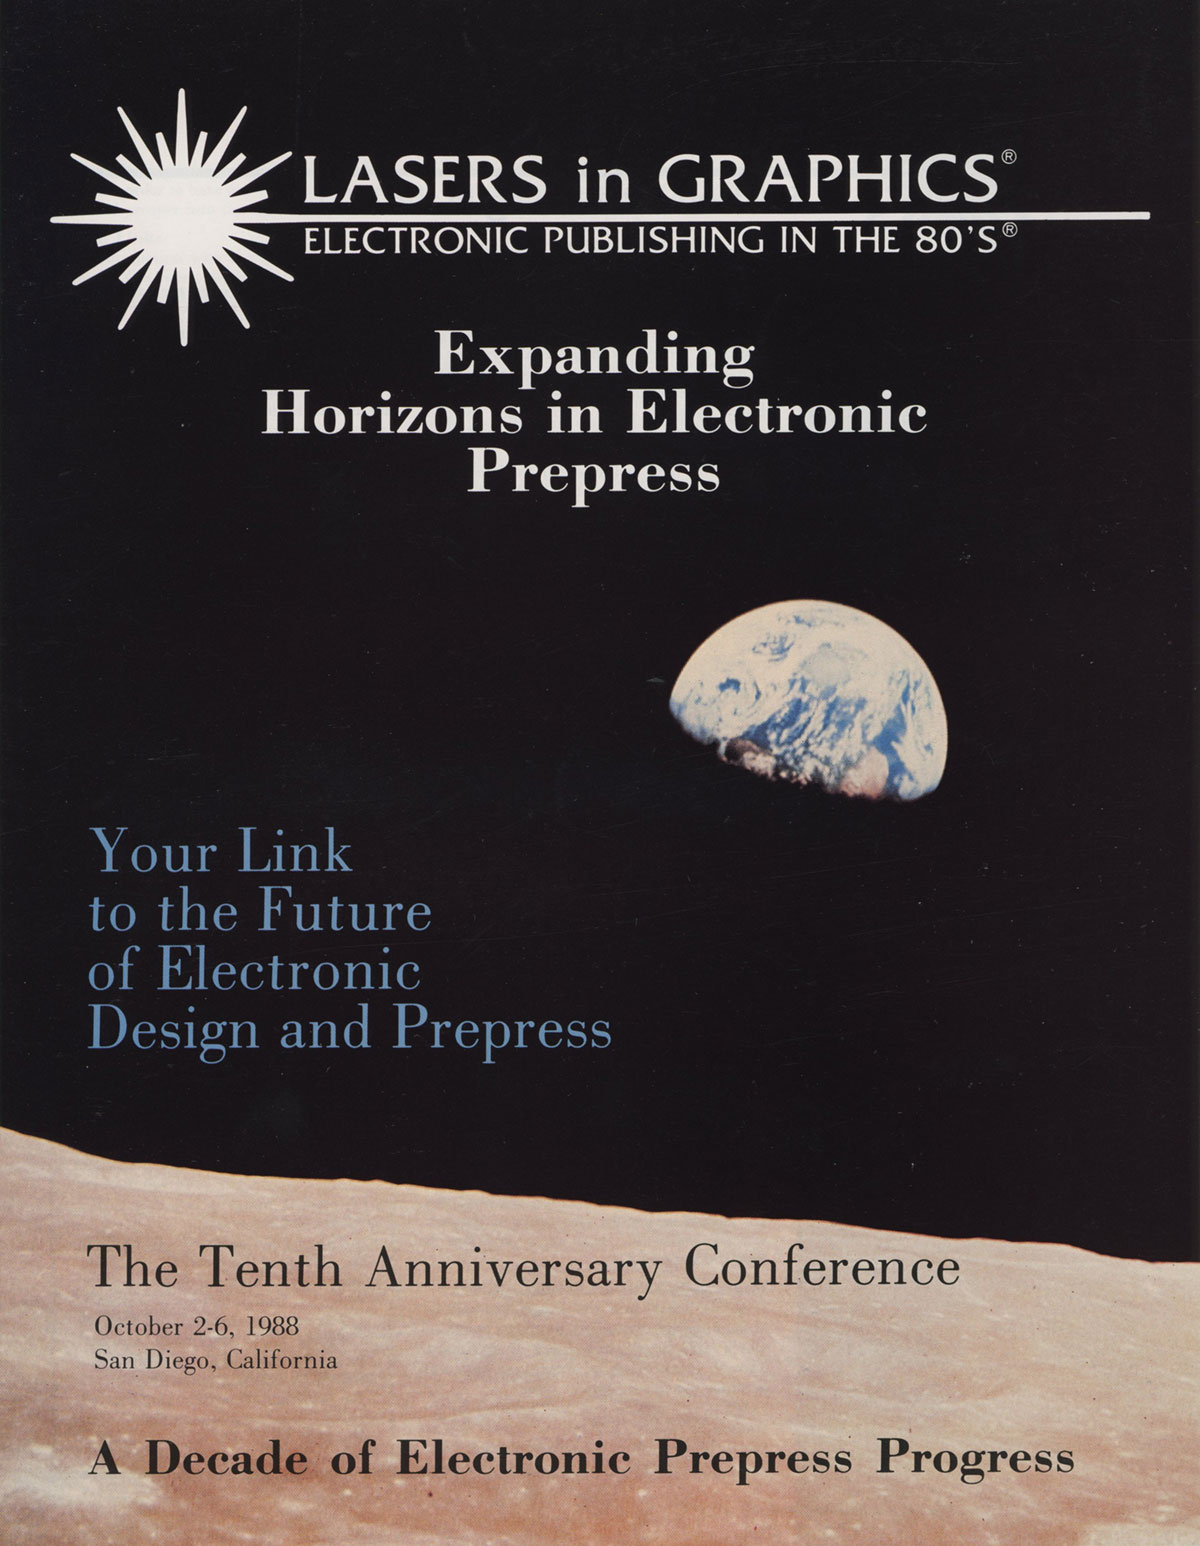 Lasers in Graphics Electronic Publishing in the 80's Expanding Horizons in Electronic Prepress The Tenth Anniversary Conference